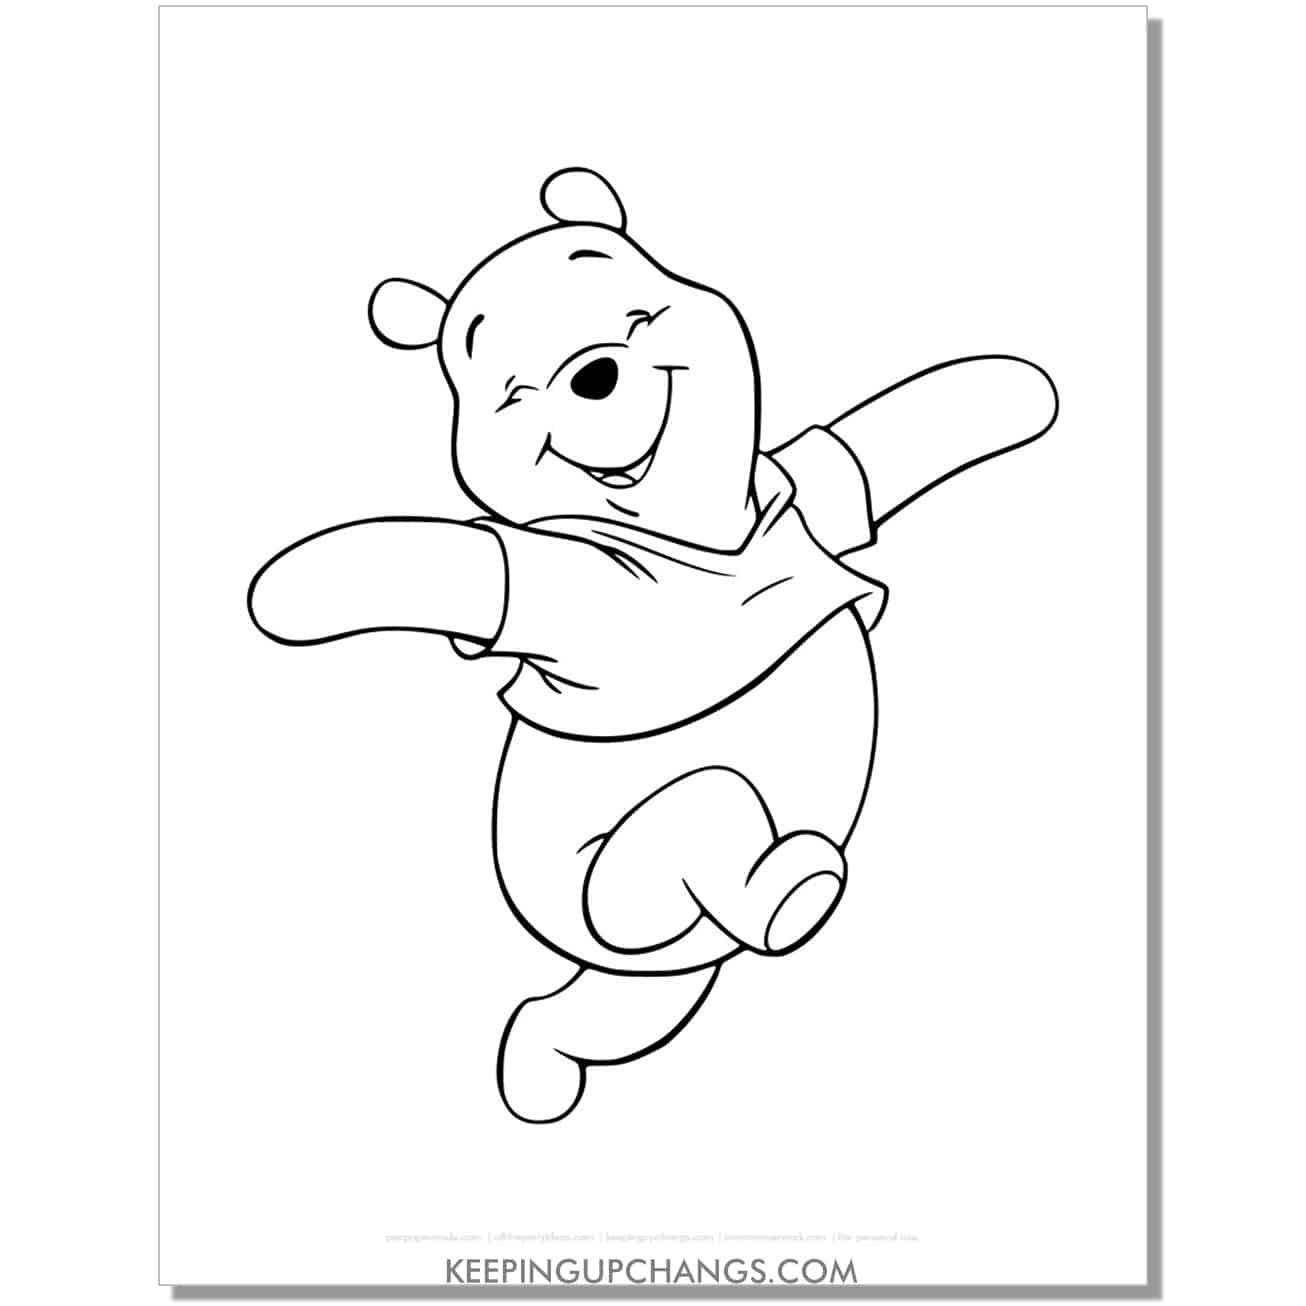 winnie the pooh skipping with joy coloring page, sheet.